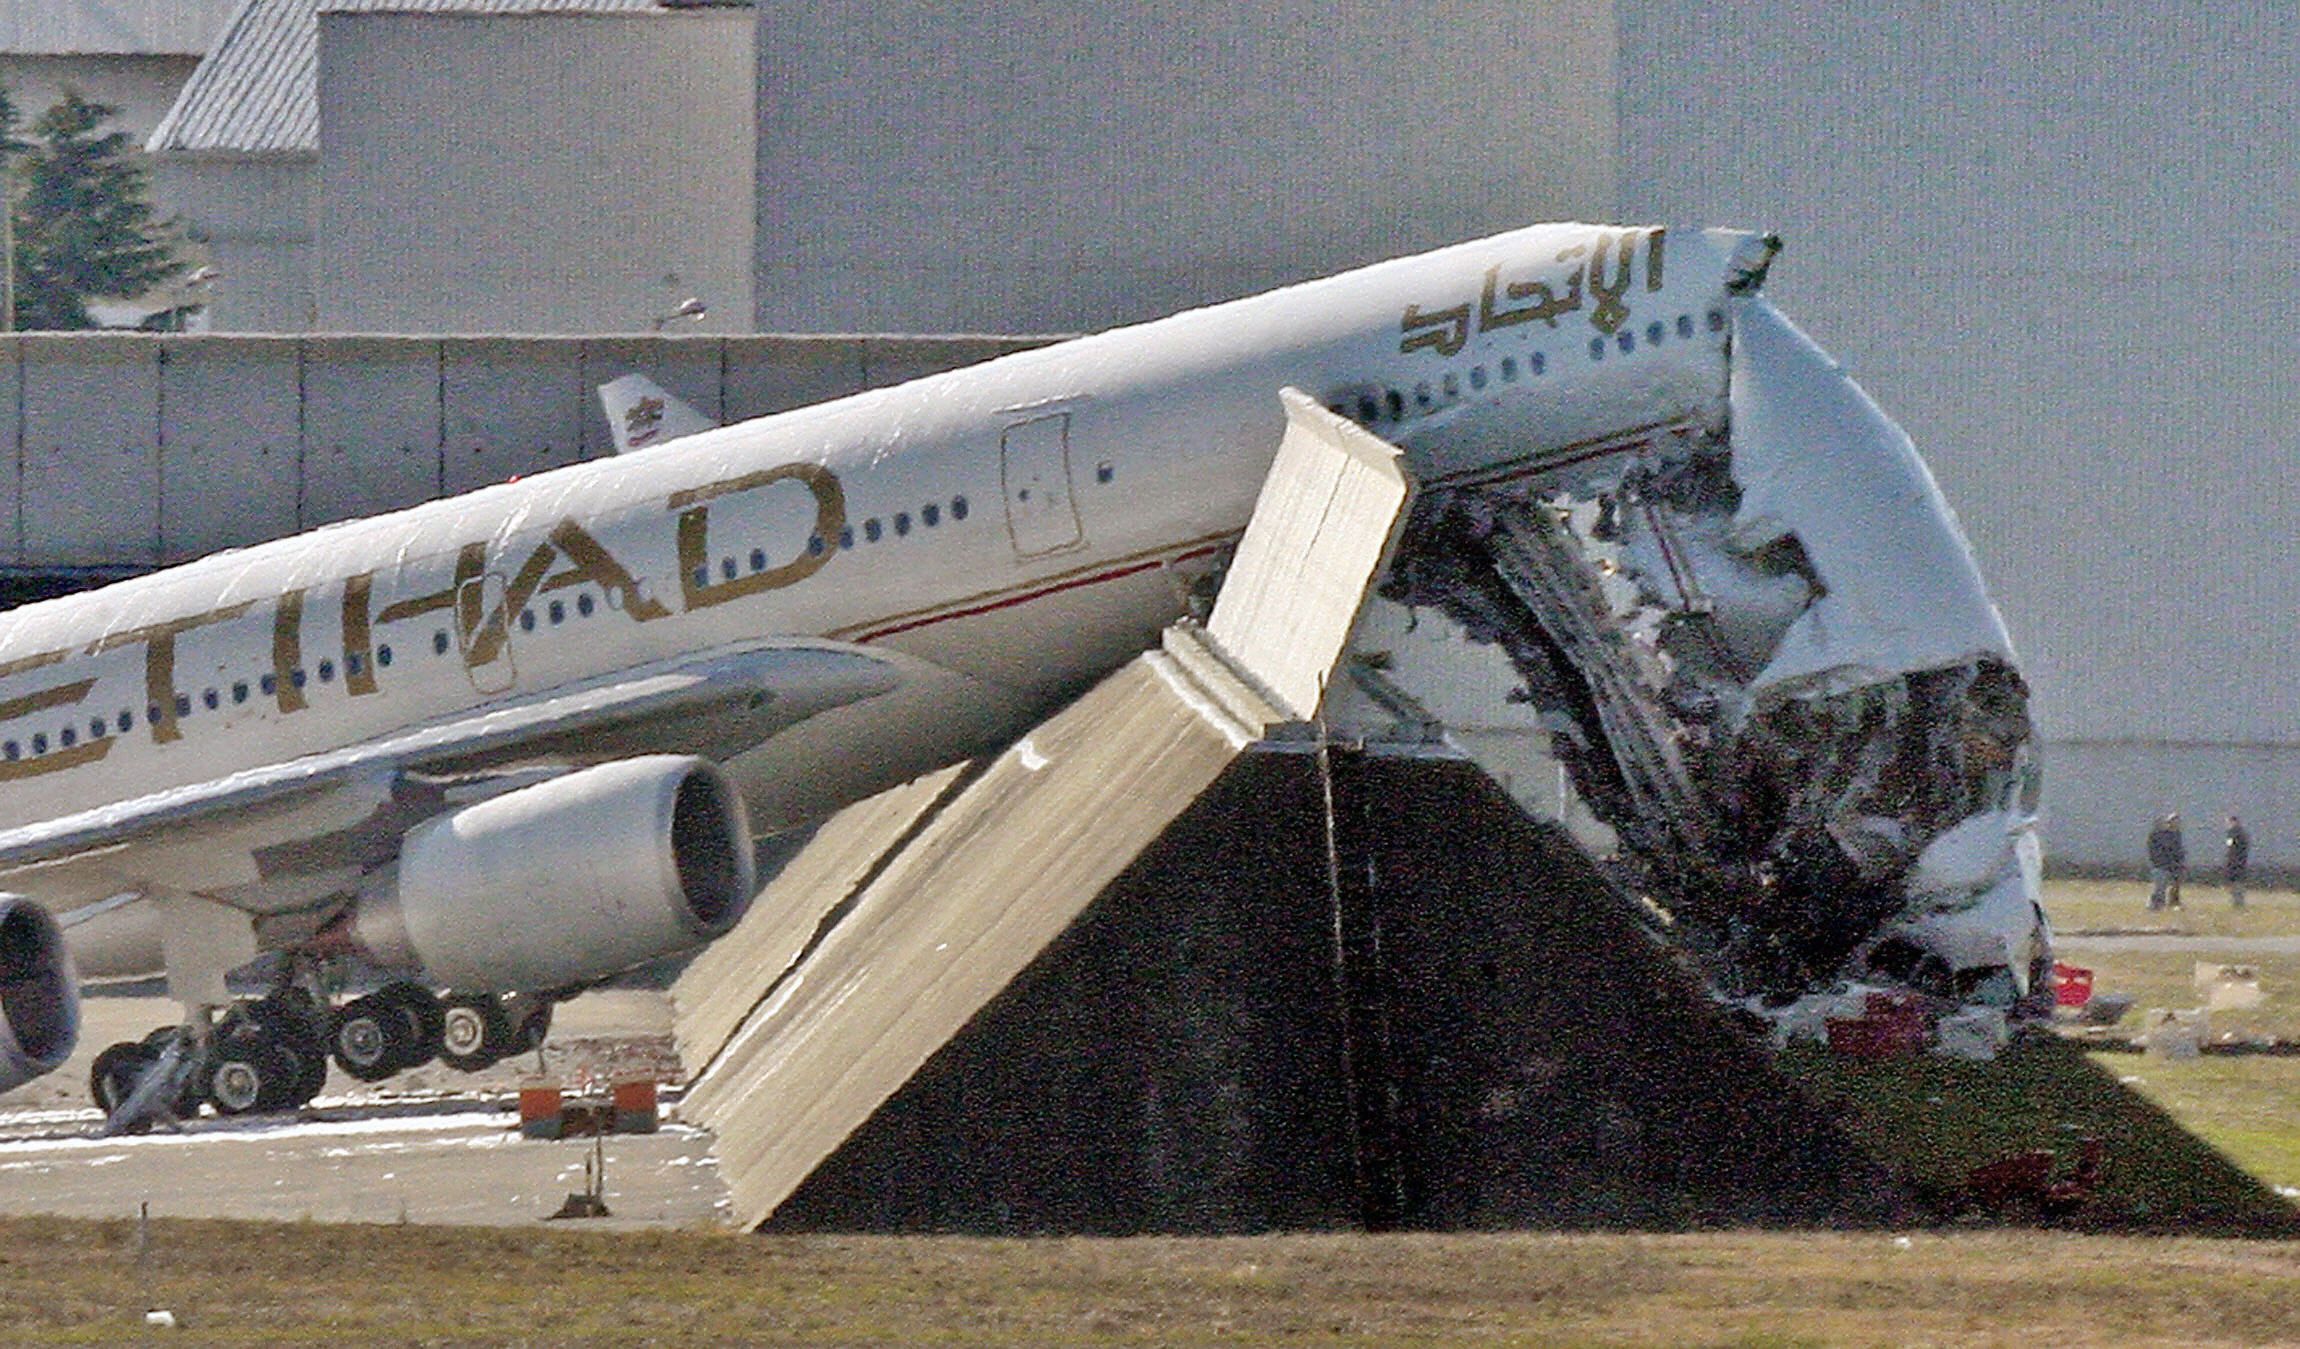 GettyImages-77945023 etihad a340-600 write off in toulouse